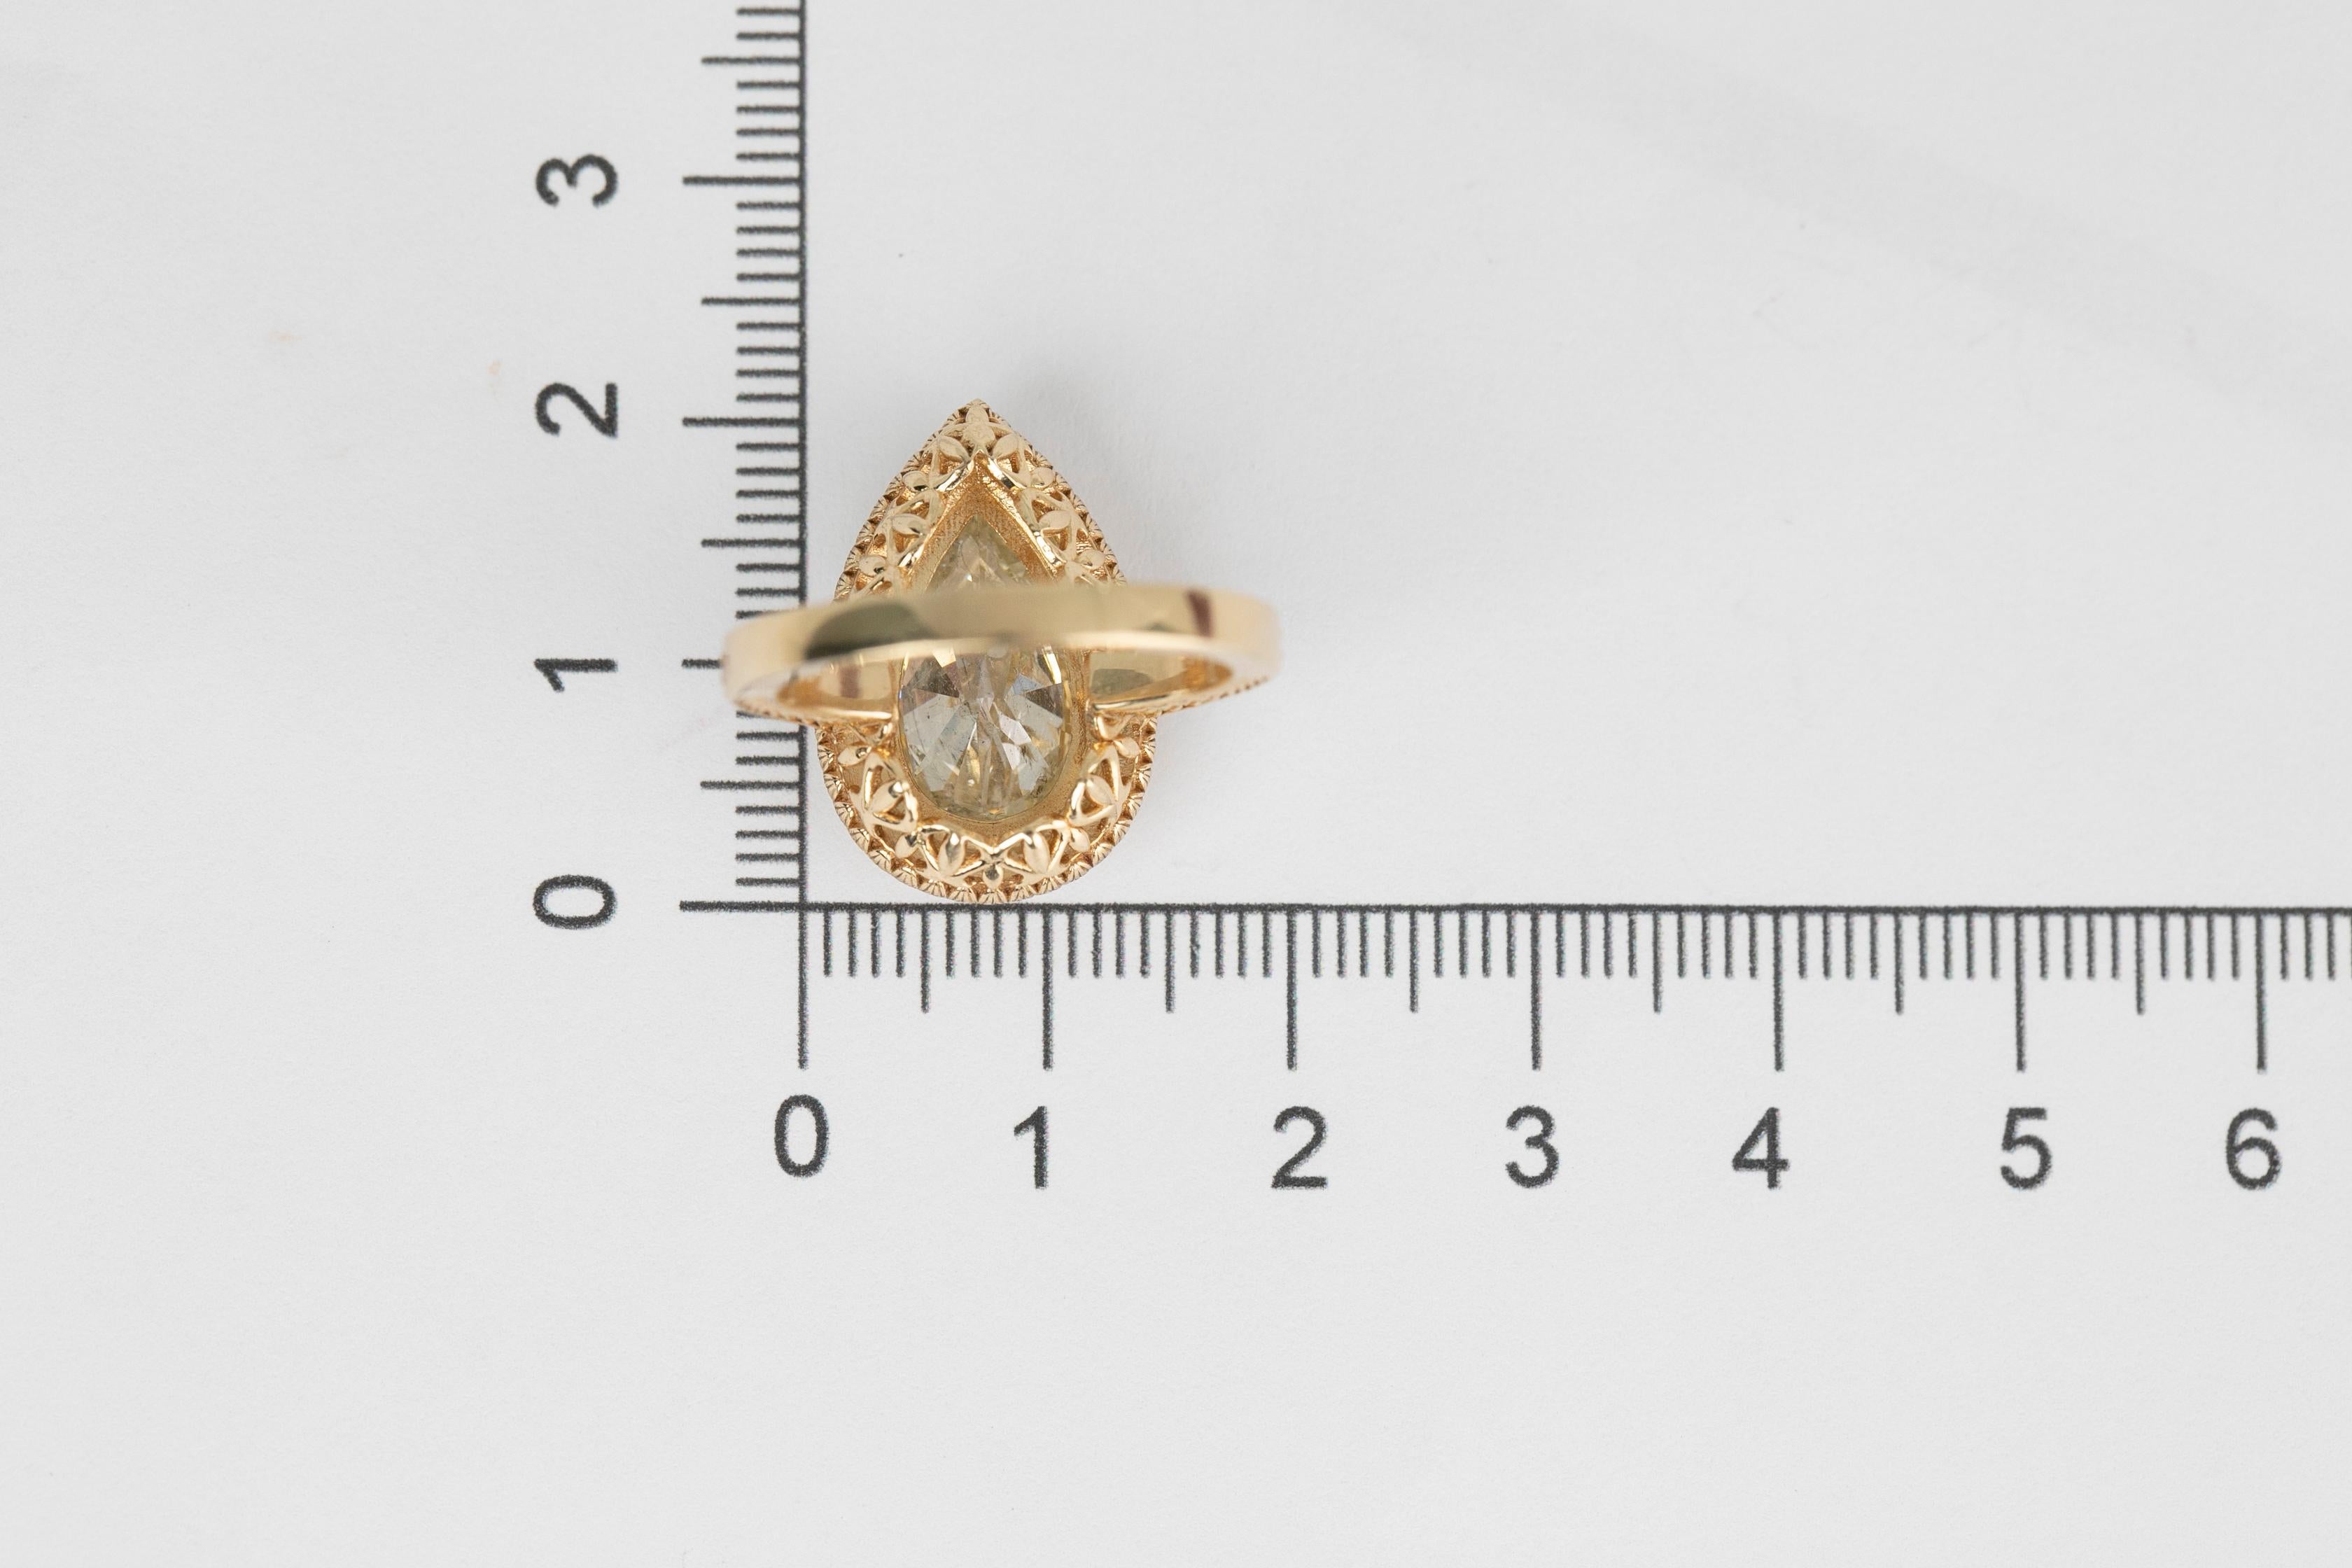 Vintage Ring 3.46 Carat Diamond Pear Drop Cut Big Stone and 14k Solid Gold Ring For Sale 4